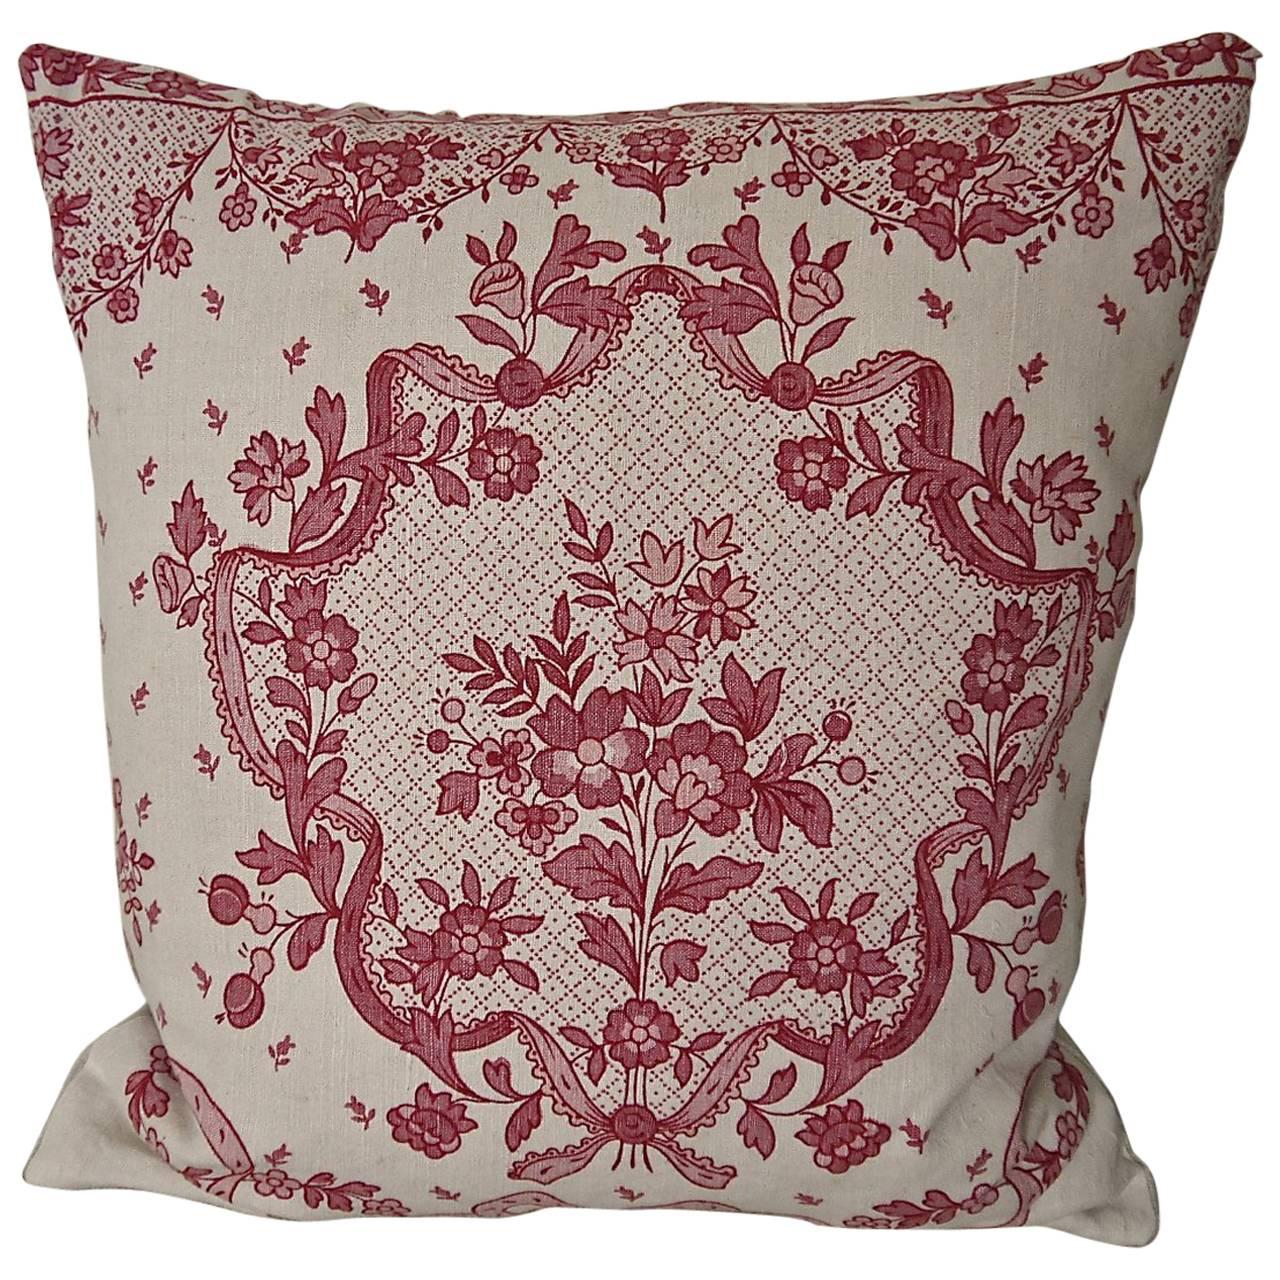  Pretty Red and Pink Floral Linen Pillow Antique French c.1920